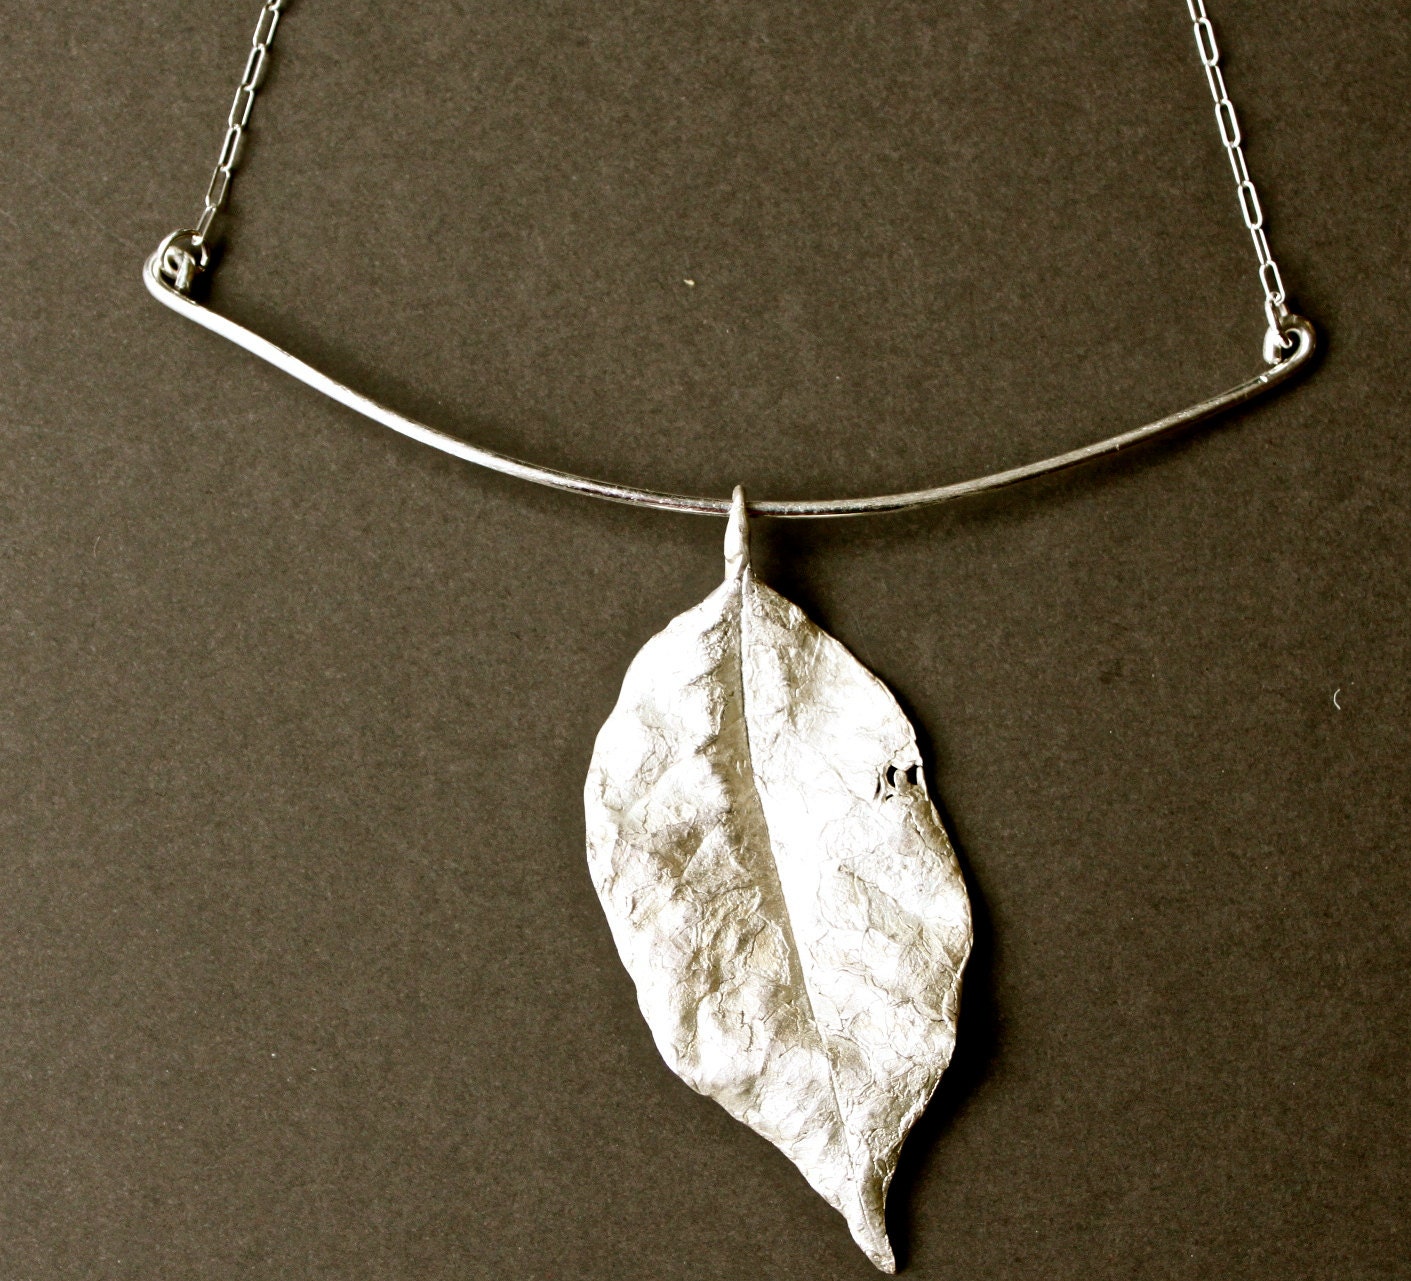 Necklace Choker Set For the Fall Silver ball earrings Large leaf pendants